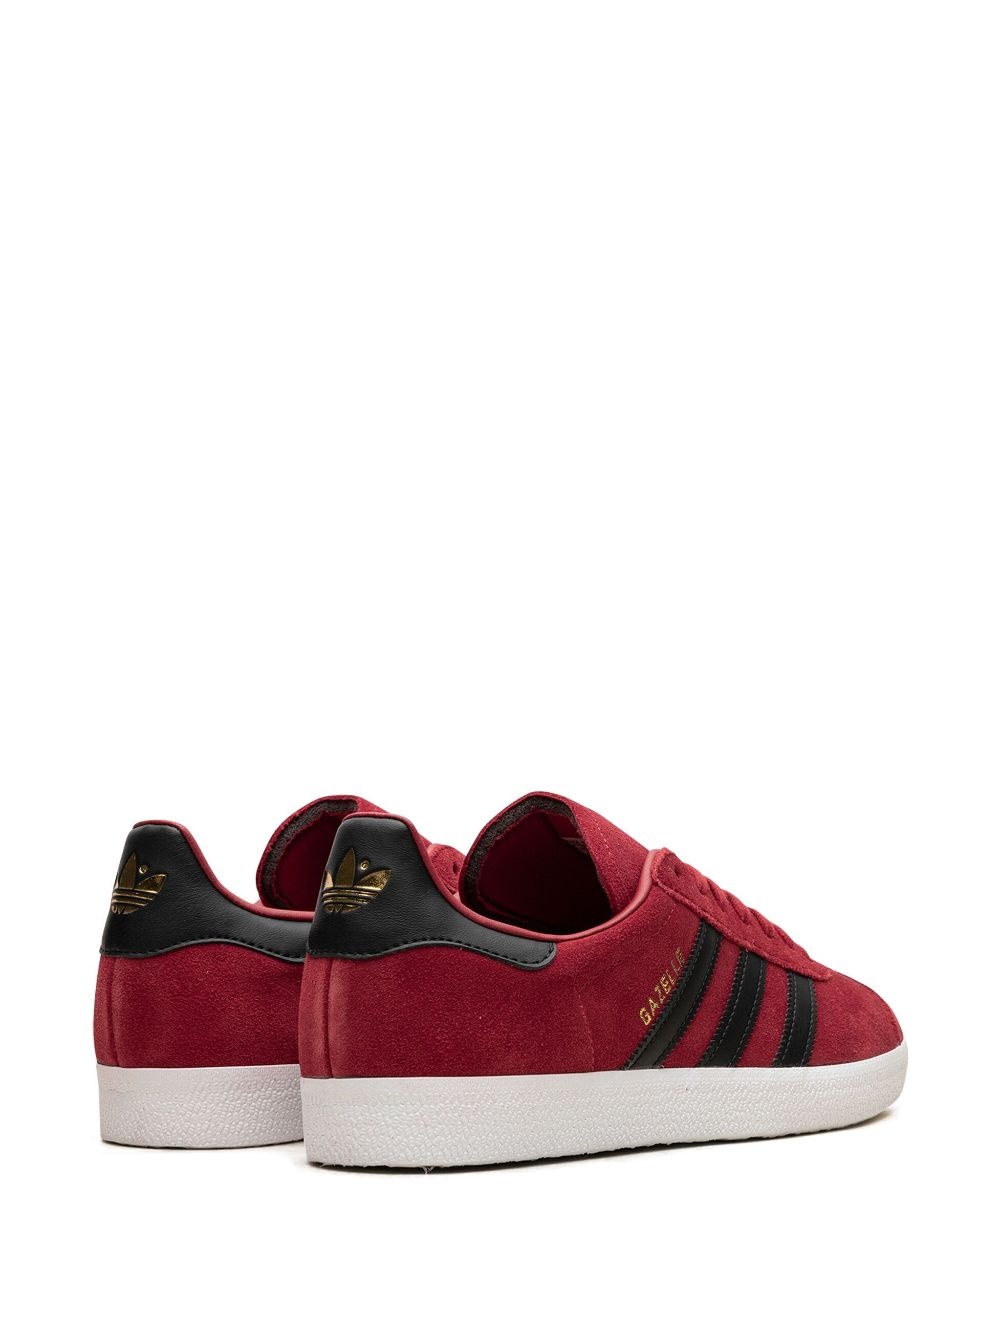 Gazelle "Manchester United" sneakers - 3